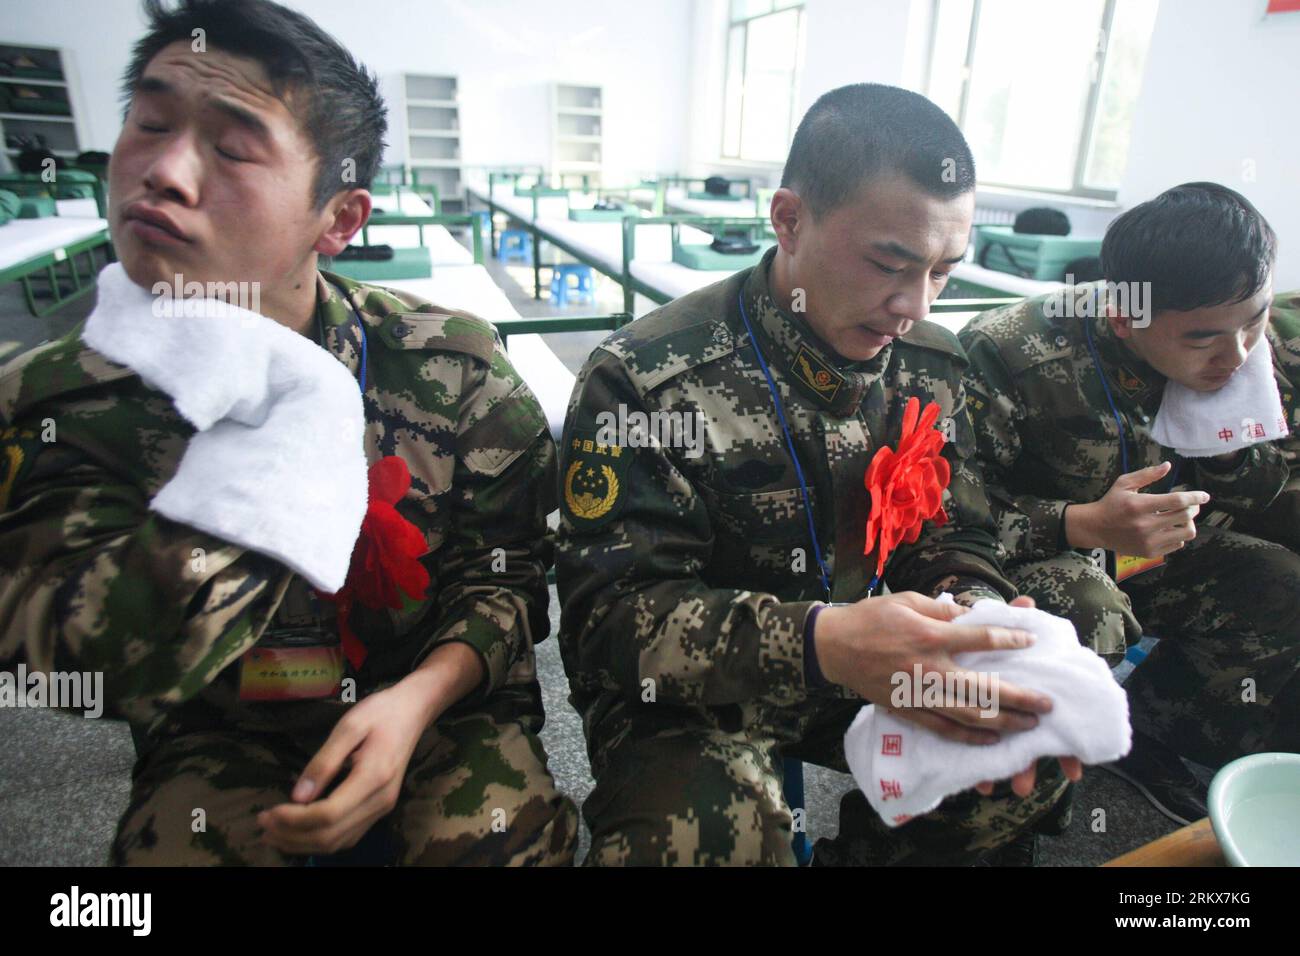 Bildnummer: 58910613  Datum: 12.12.2012  Copyright: imago/Xinhua (121212) -- HOHHOT, Dec. 12, 2012 (Xinhua) -- Newly recruited para-military policemen wash their faces upon their arrival at their barrack in Hohhot, north China s Inner Mongolia Autonomous Region, Dec. 12, 2012. Newly recruited soldiers of People s Liberation Army (PLA) and para-military policemen joined their units around the country recently. (Xinhua/Zhang Fan) (zn) CHINA-HOHHOT-MILITARY-NEW RECUITS (CN) PUBLICATIONxNOTxINxCHN Gesellschaft Militär Rekruten Einberufung x0x xac 2012 quer      58910613 Date 12 12 2012 Copyright I Stock Photo